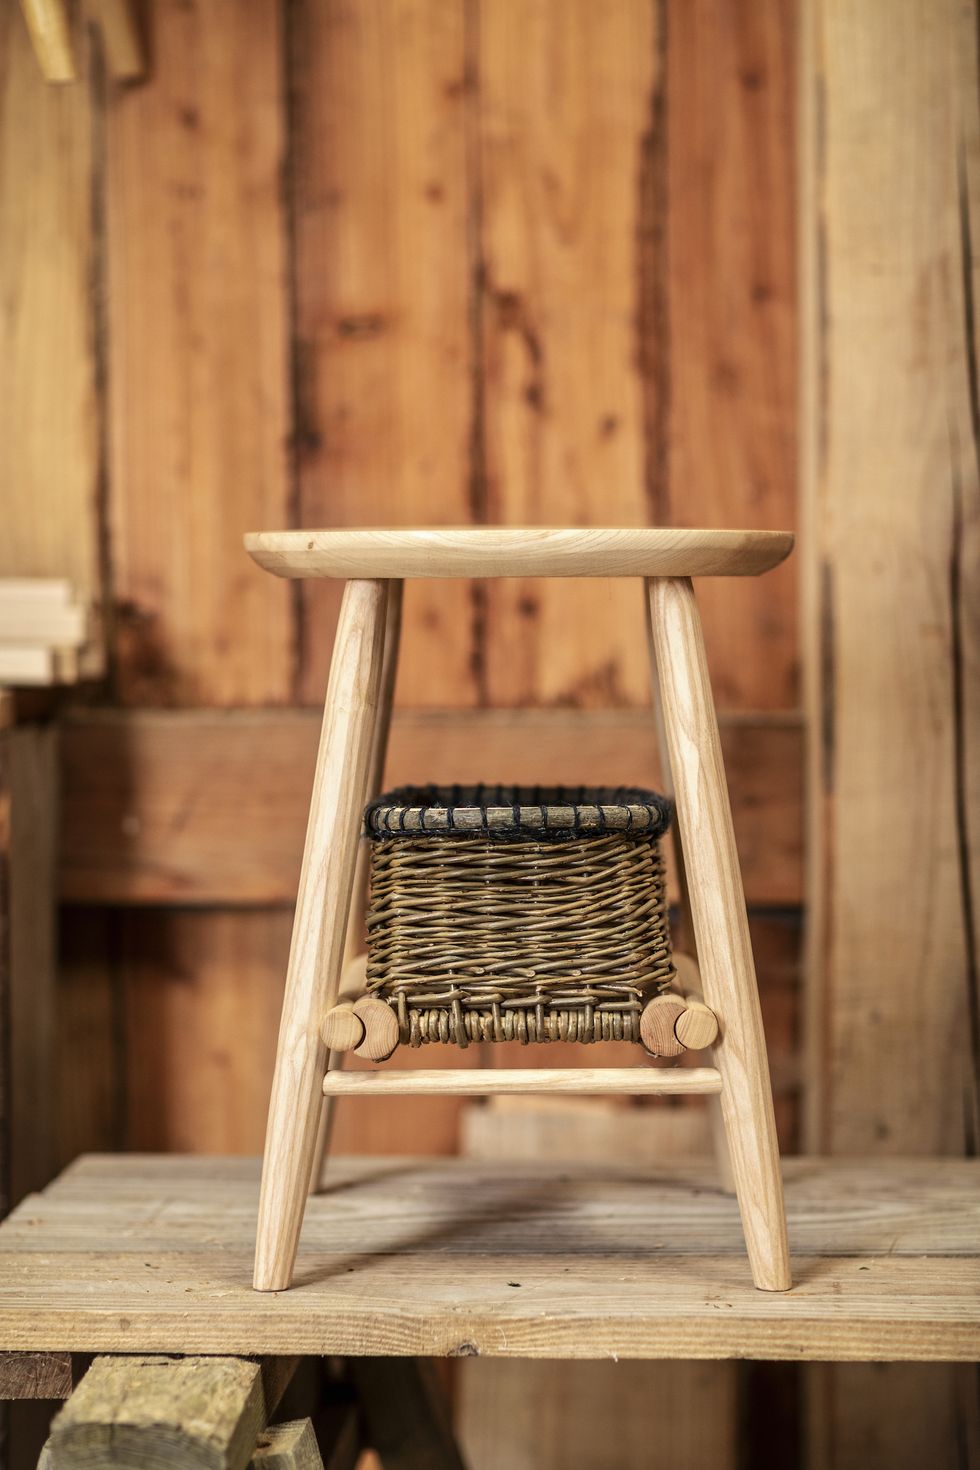 a chair with a basket on it